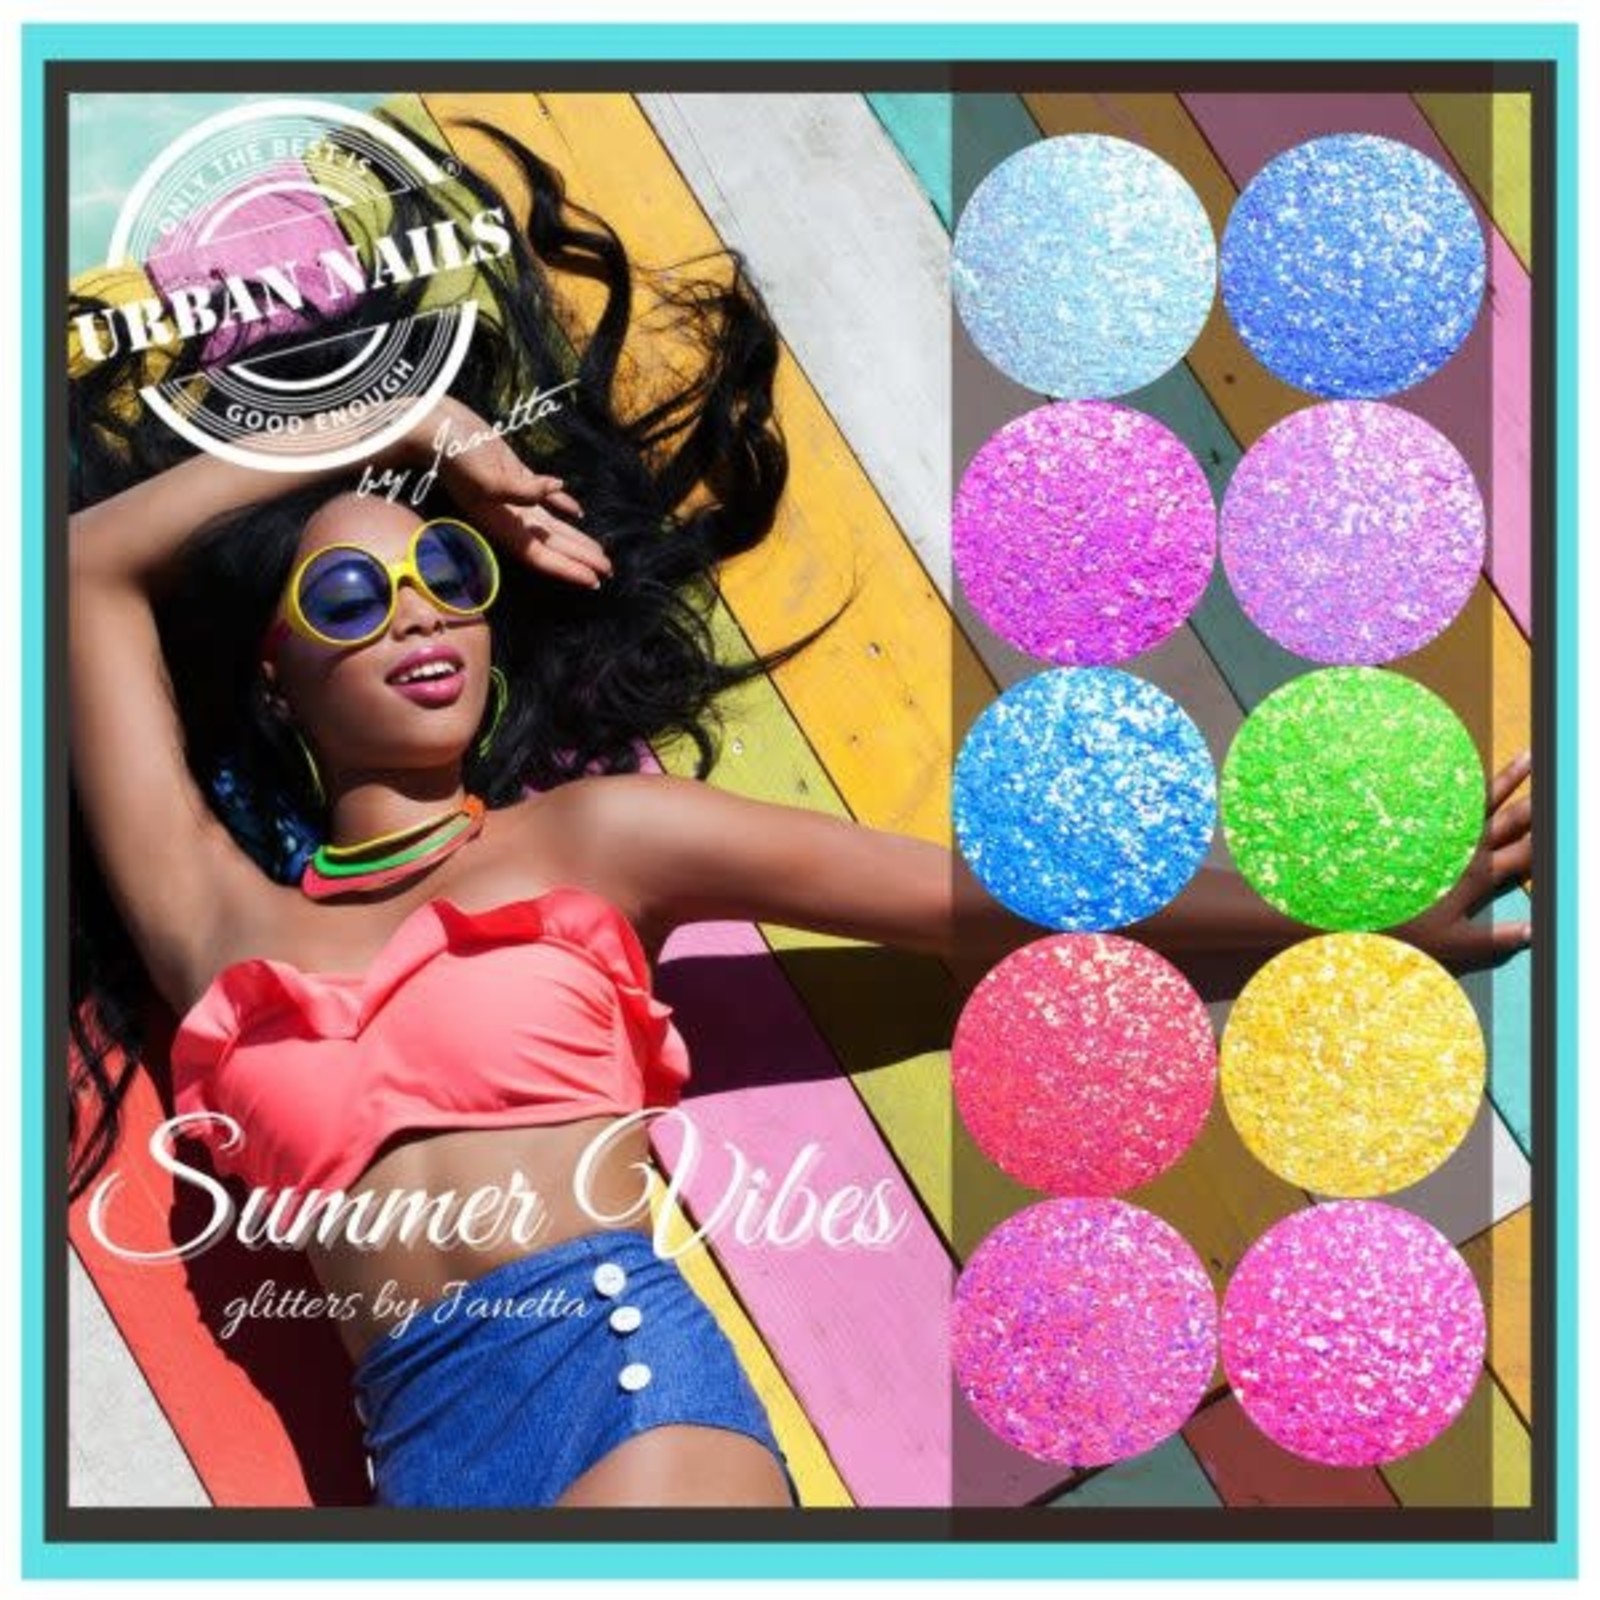 Urban nails Summer Vibes Glitters By Janetta